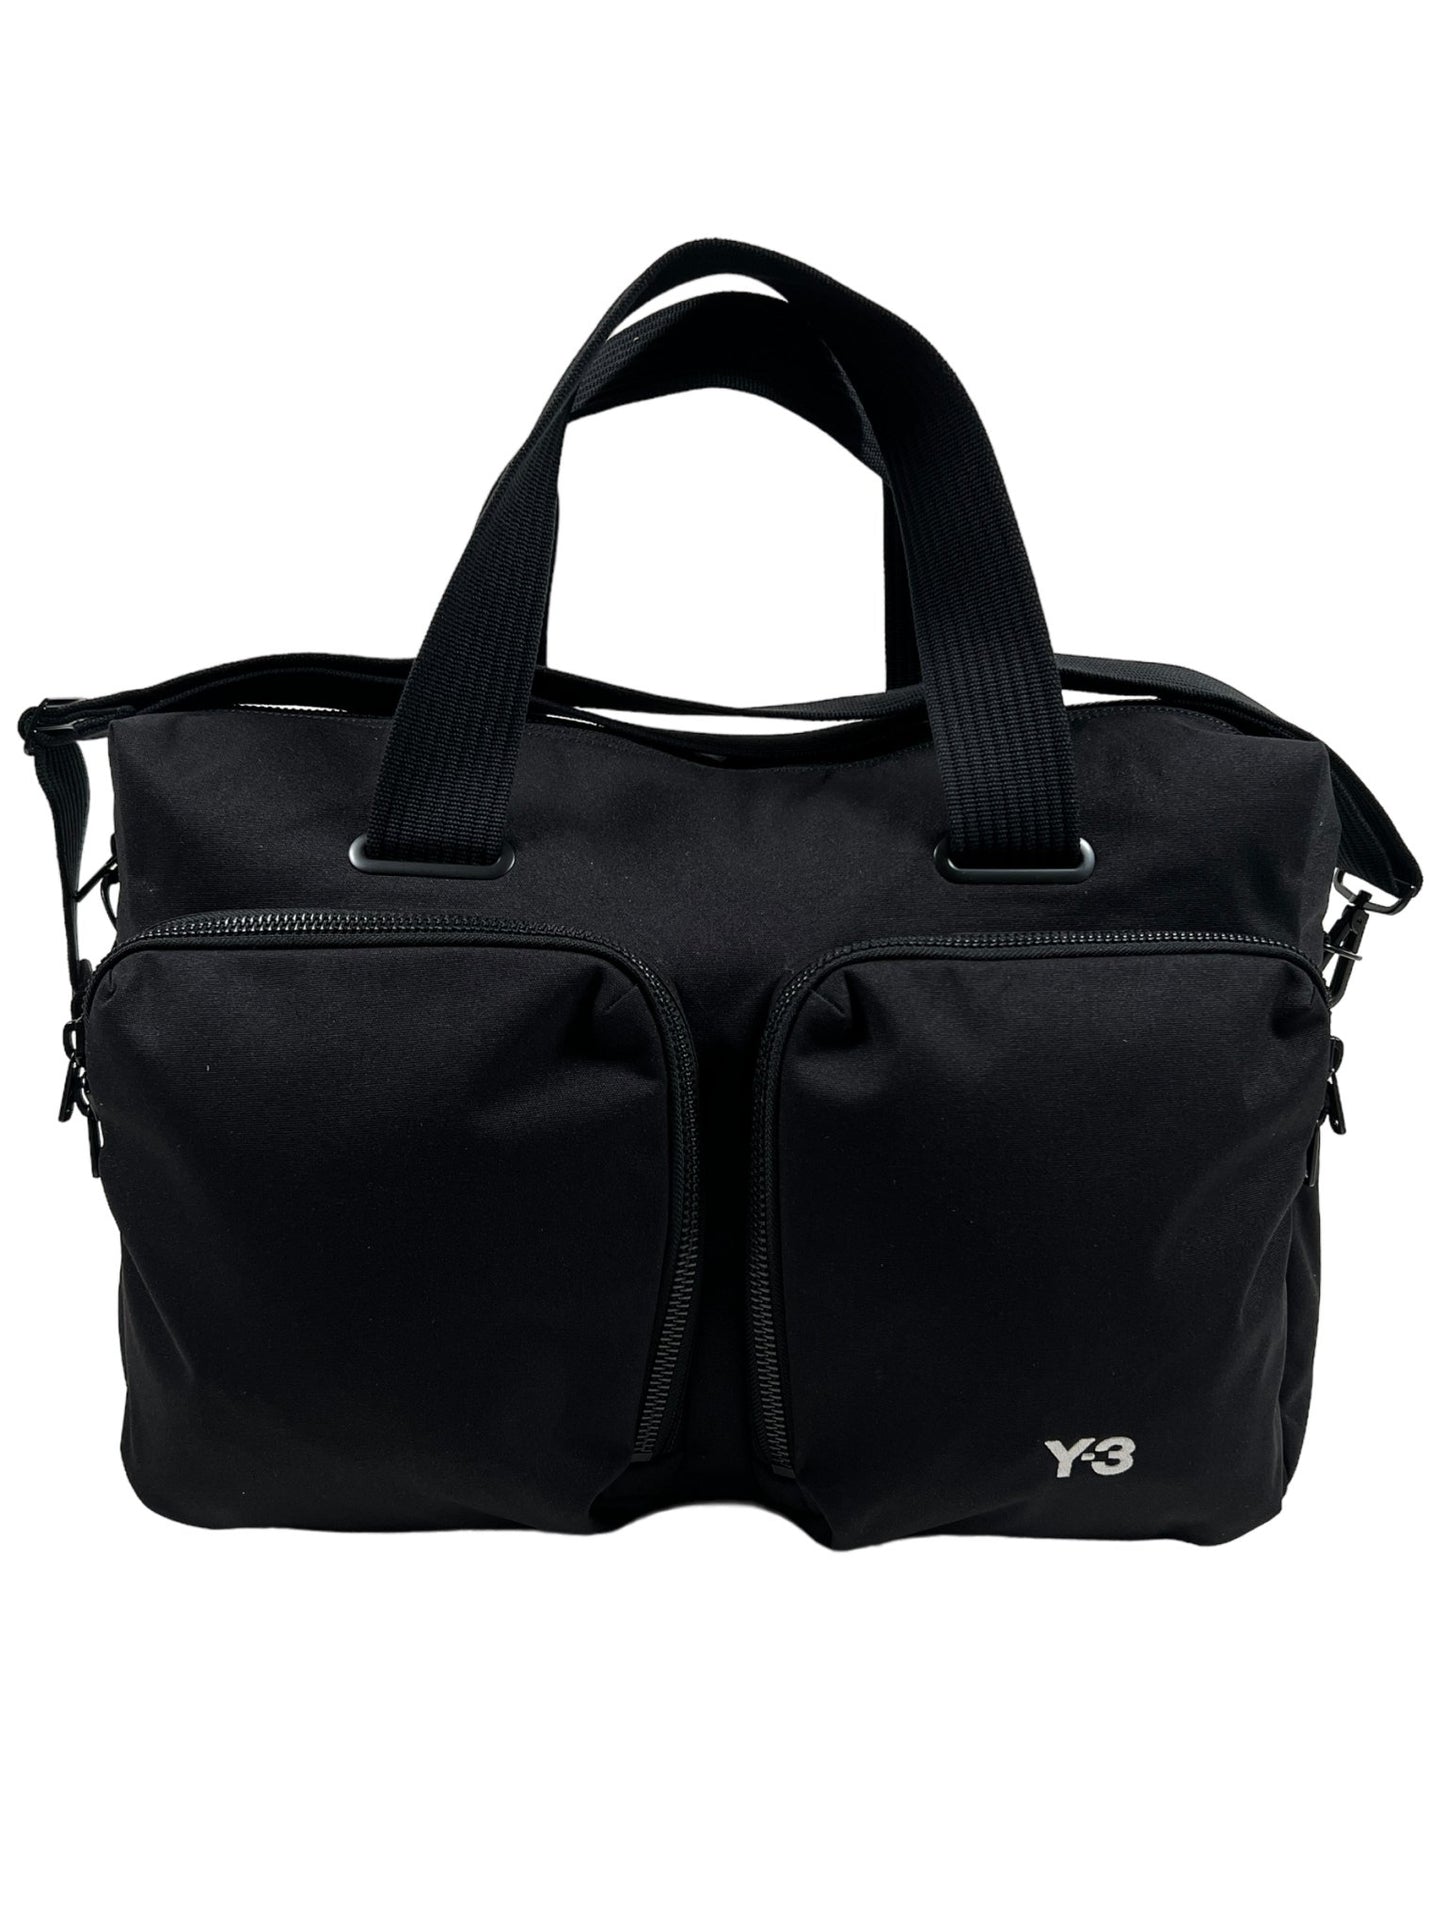 A black ADIDAS x Y-3 TRAVEL BAG IR5793 duffel bag with two compartments and an adjustable carry strap.